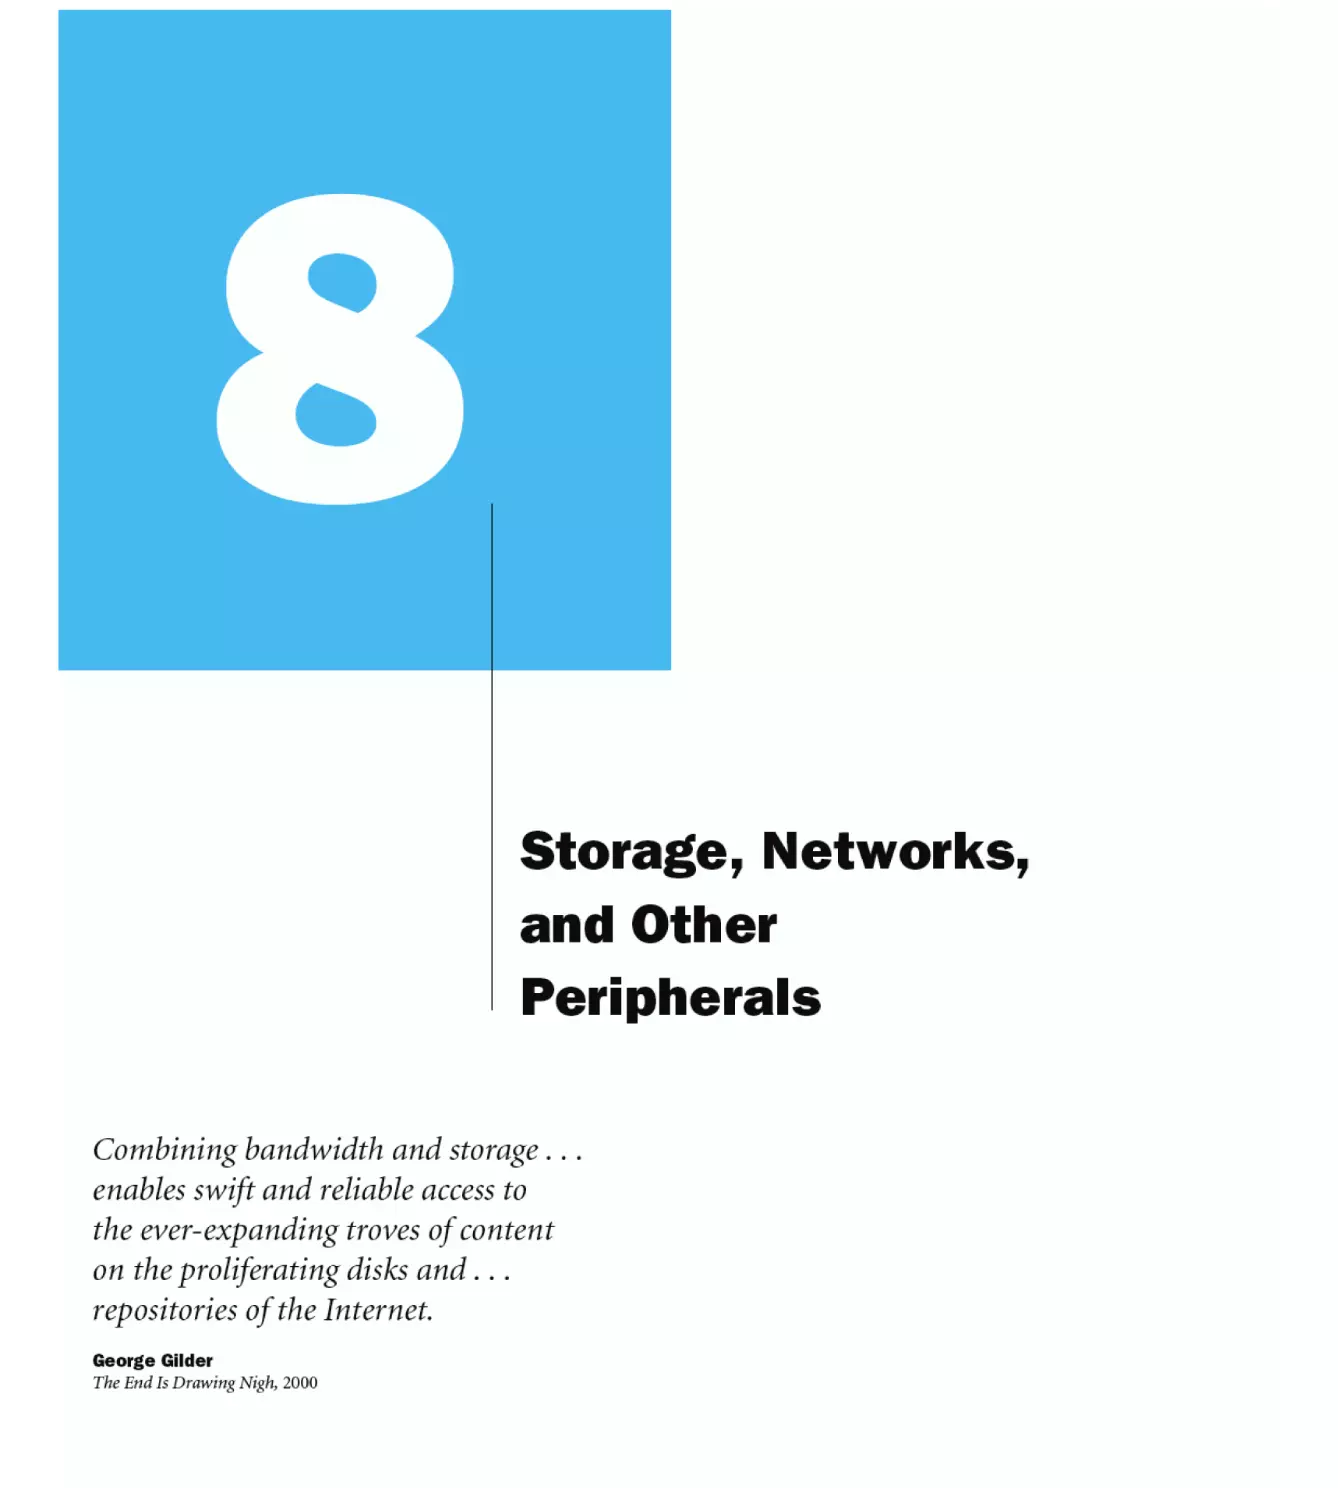 8. Storage, Networks, and Other Peripherals